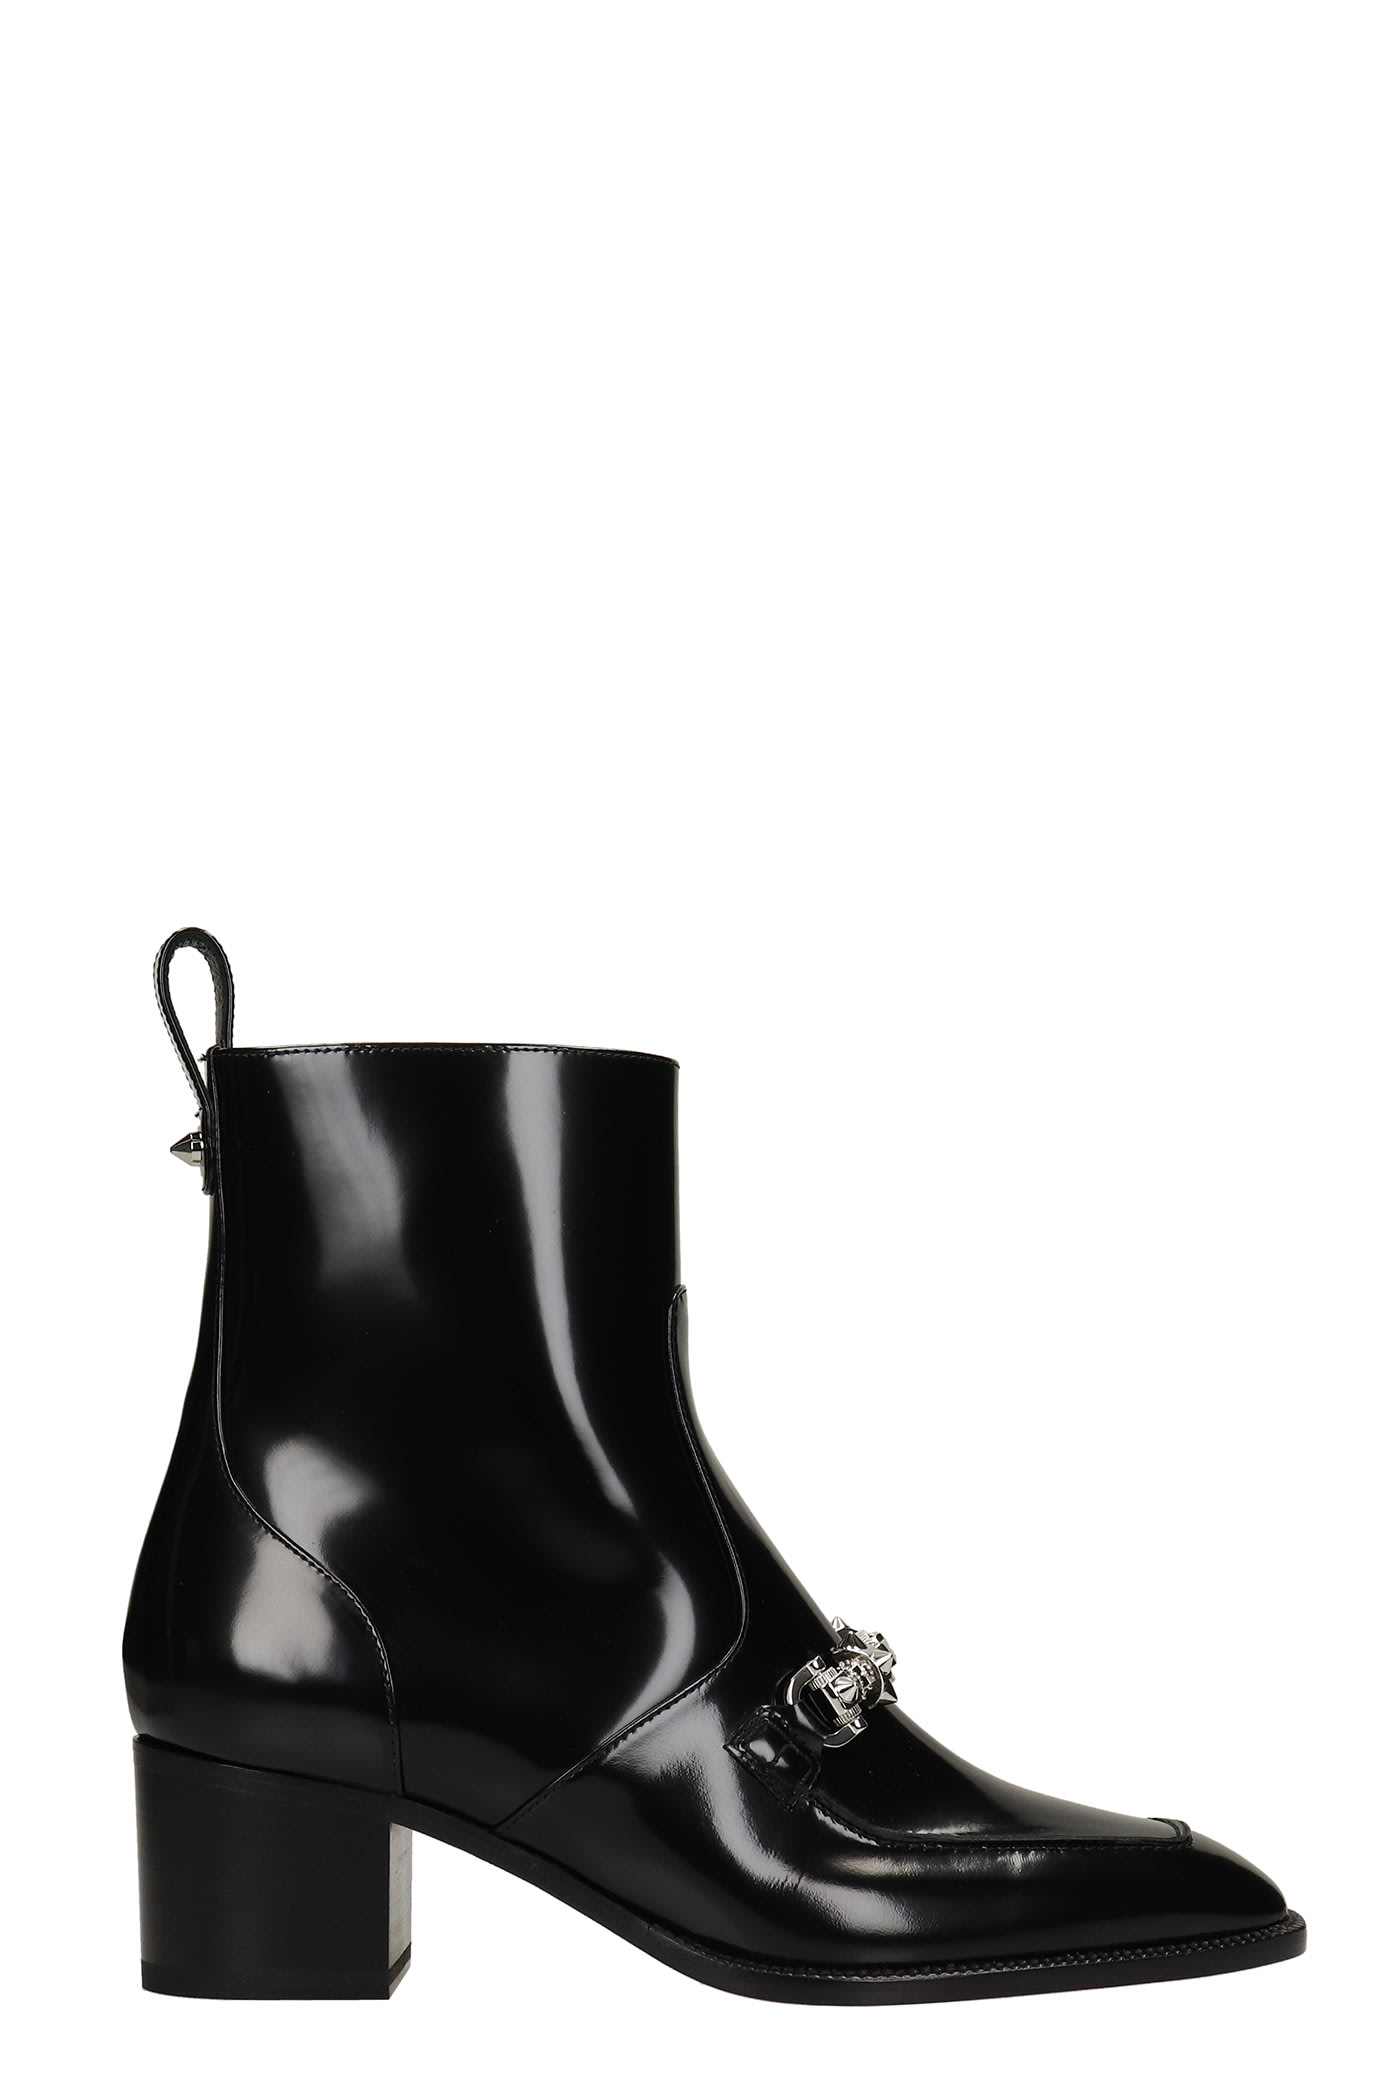 Mayerswing High Heels Ankle Boots In Black Leather